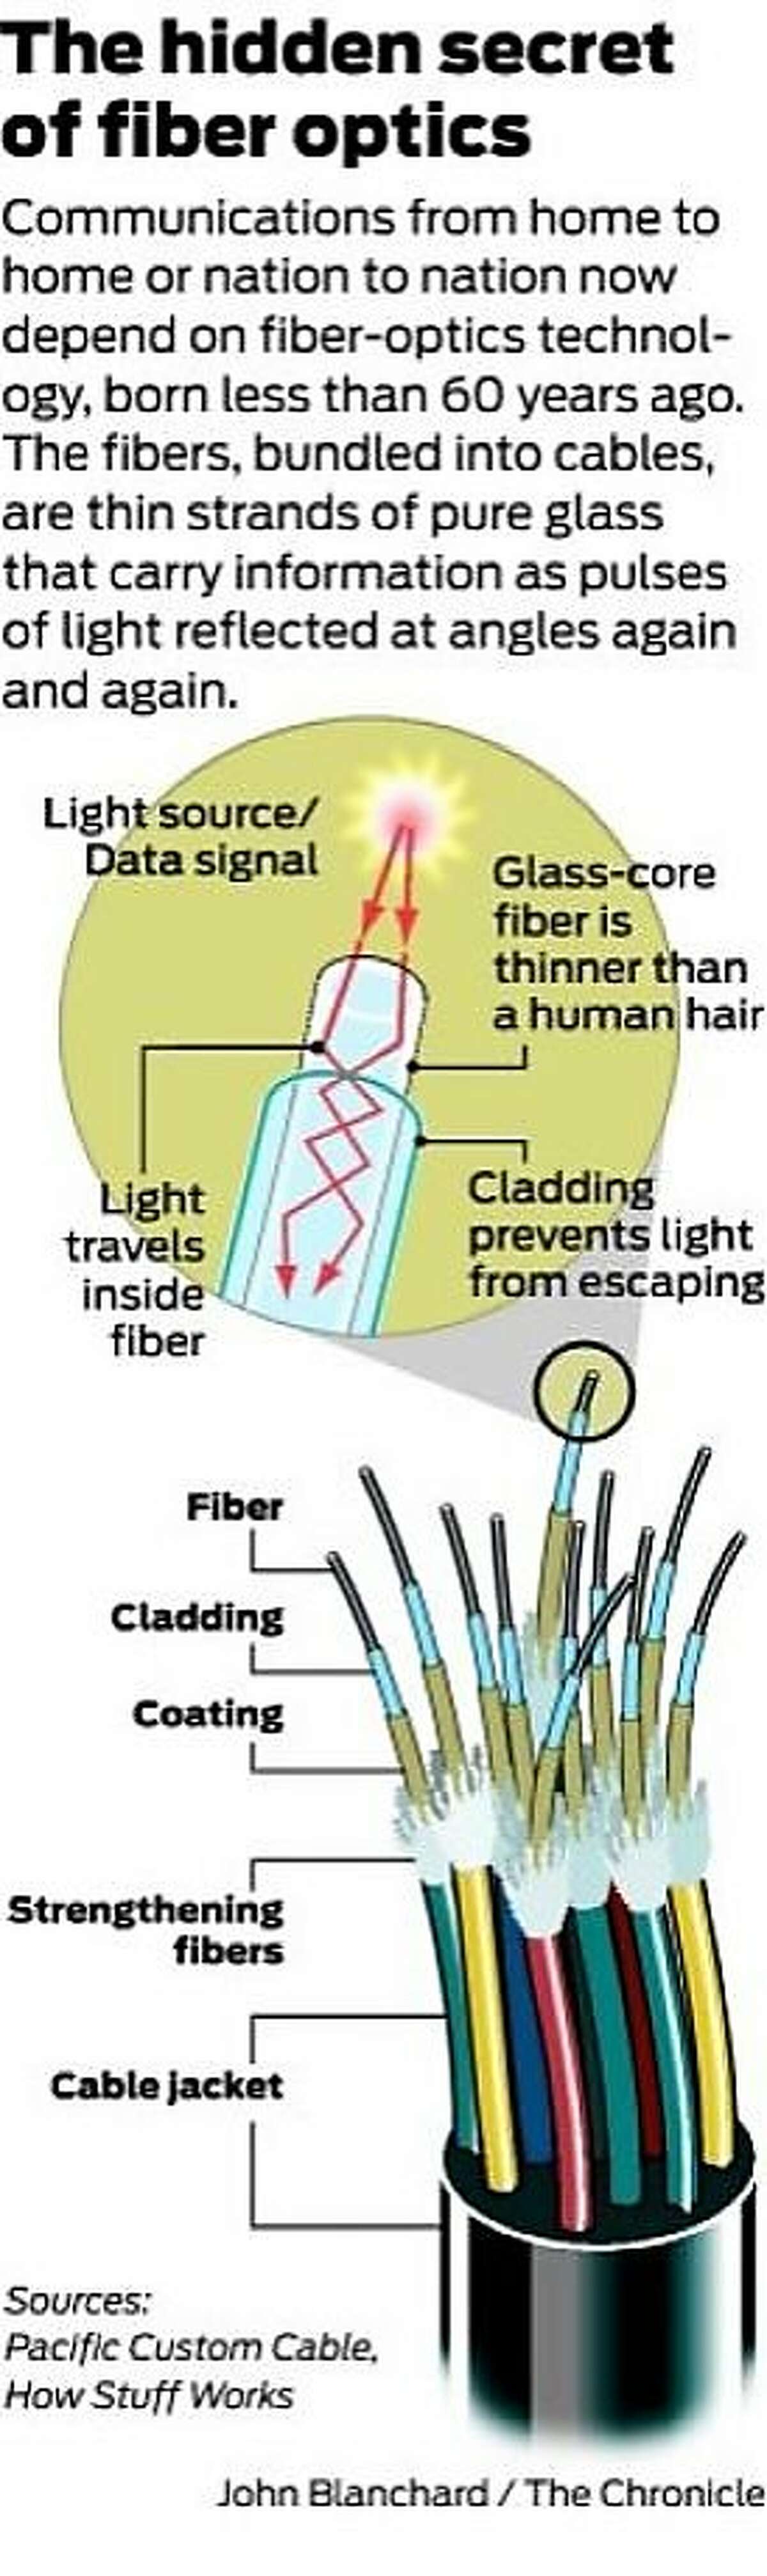 Fiber optic cables are used by telecommunications companies to transmit telephone signals, Internet communication and cable television signals.